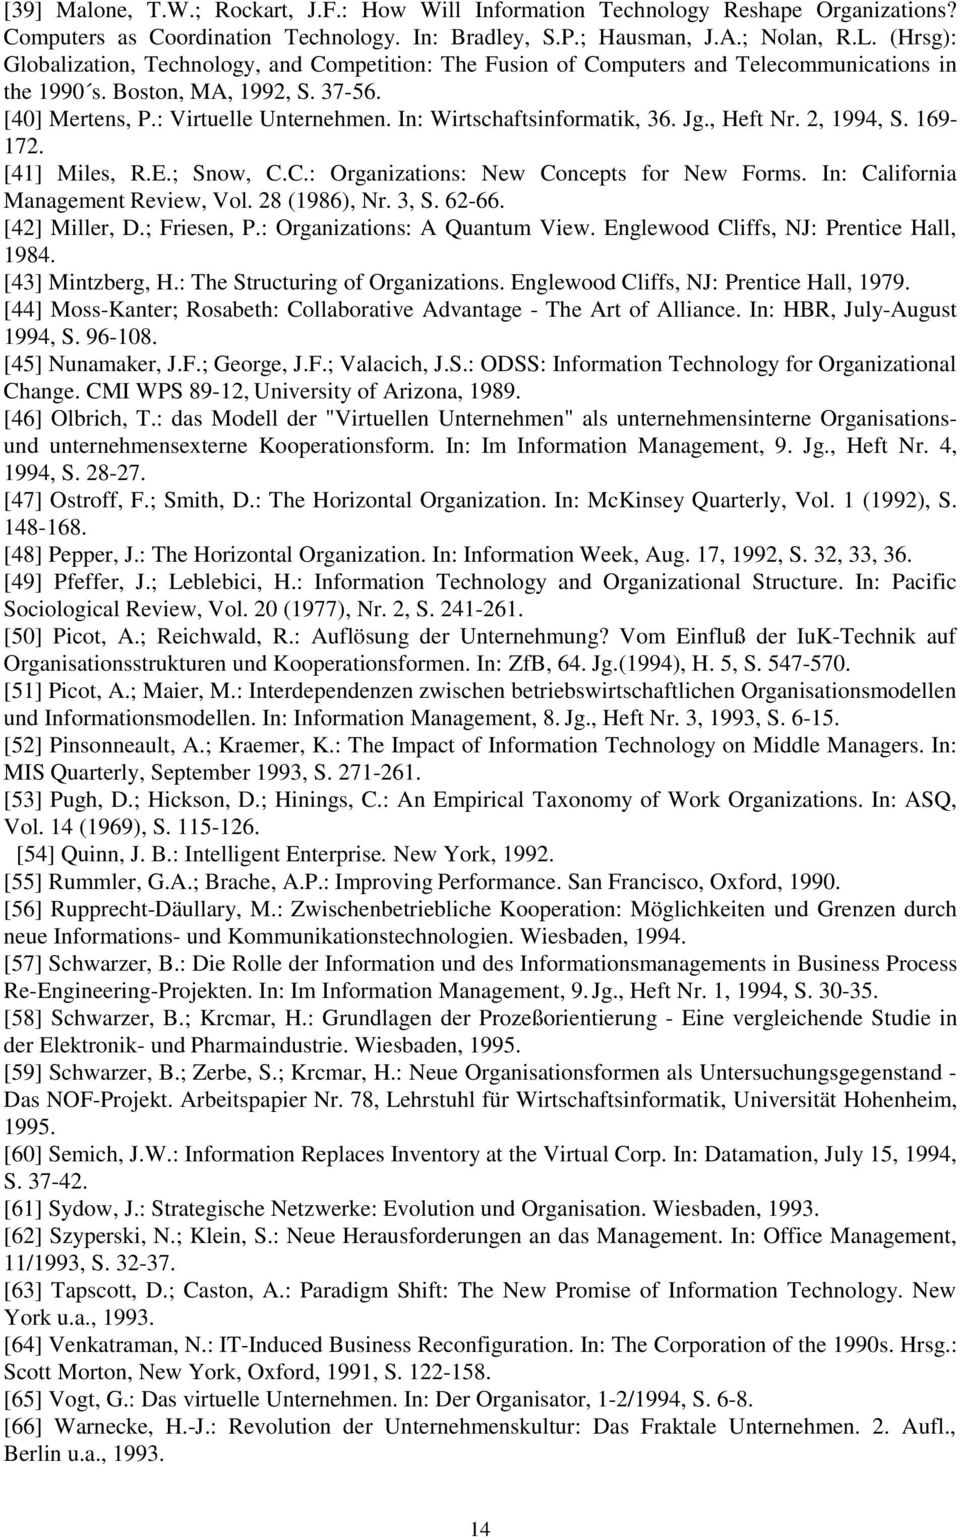 In: Wirtschaftsinformatik, 36. Jg., Heft Nr. 2, 1994, S. 169-172. [41] Miles, R.E.; Snow, C.C.: Organizations: New Concepts for New Forms. In: California Management Review, Vol. 28 (1986), Nr. 3, S.